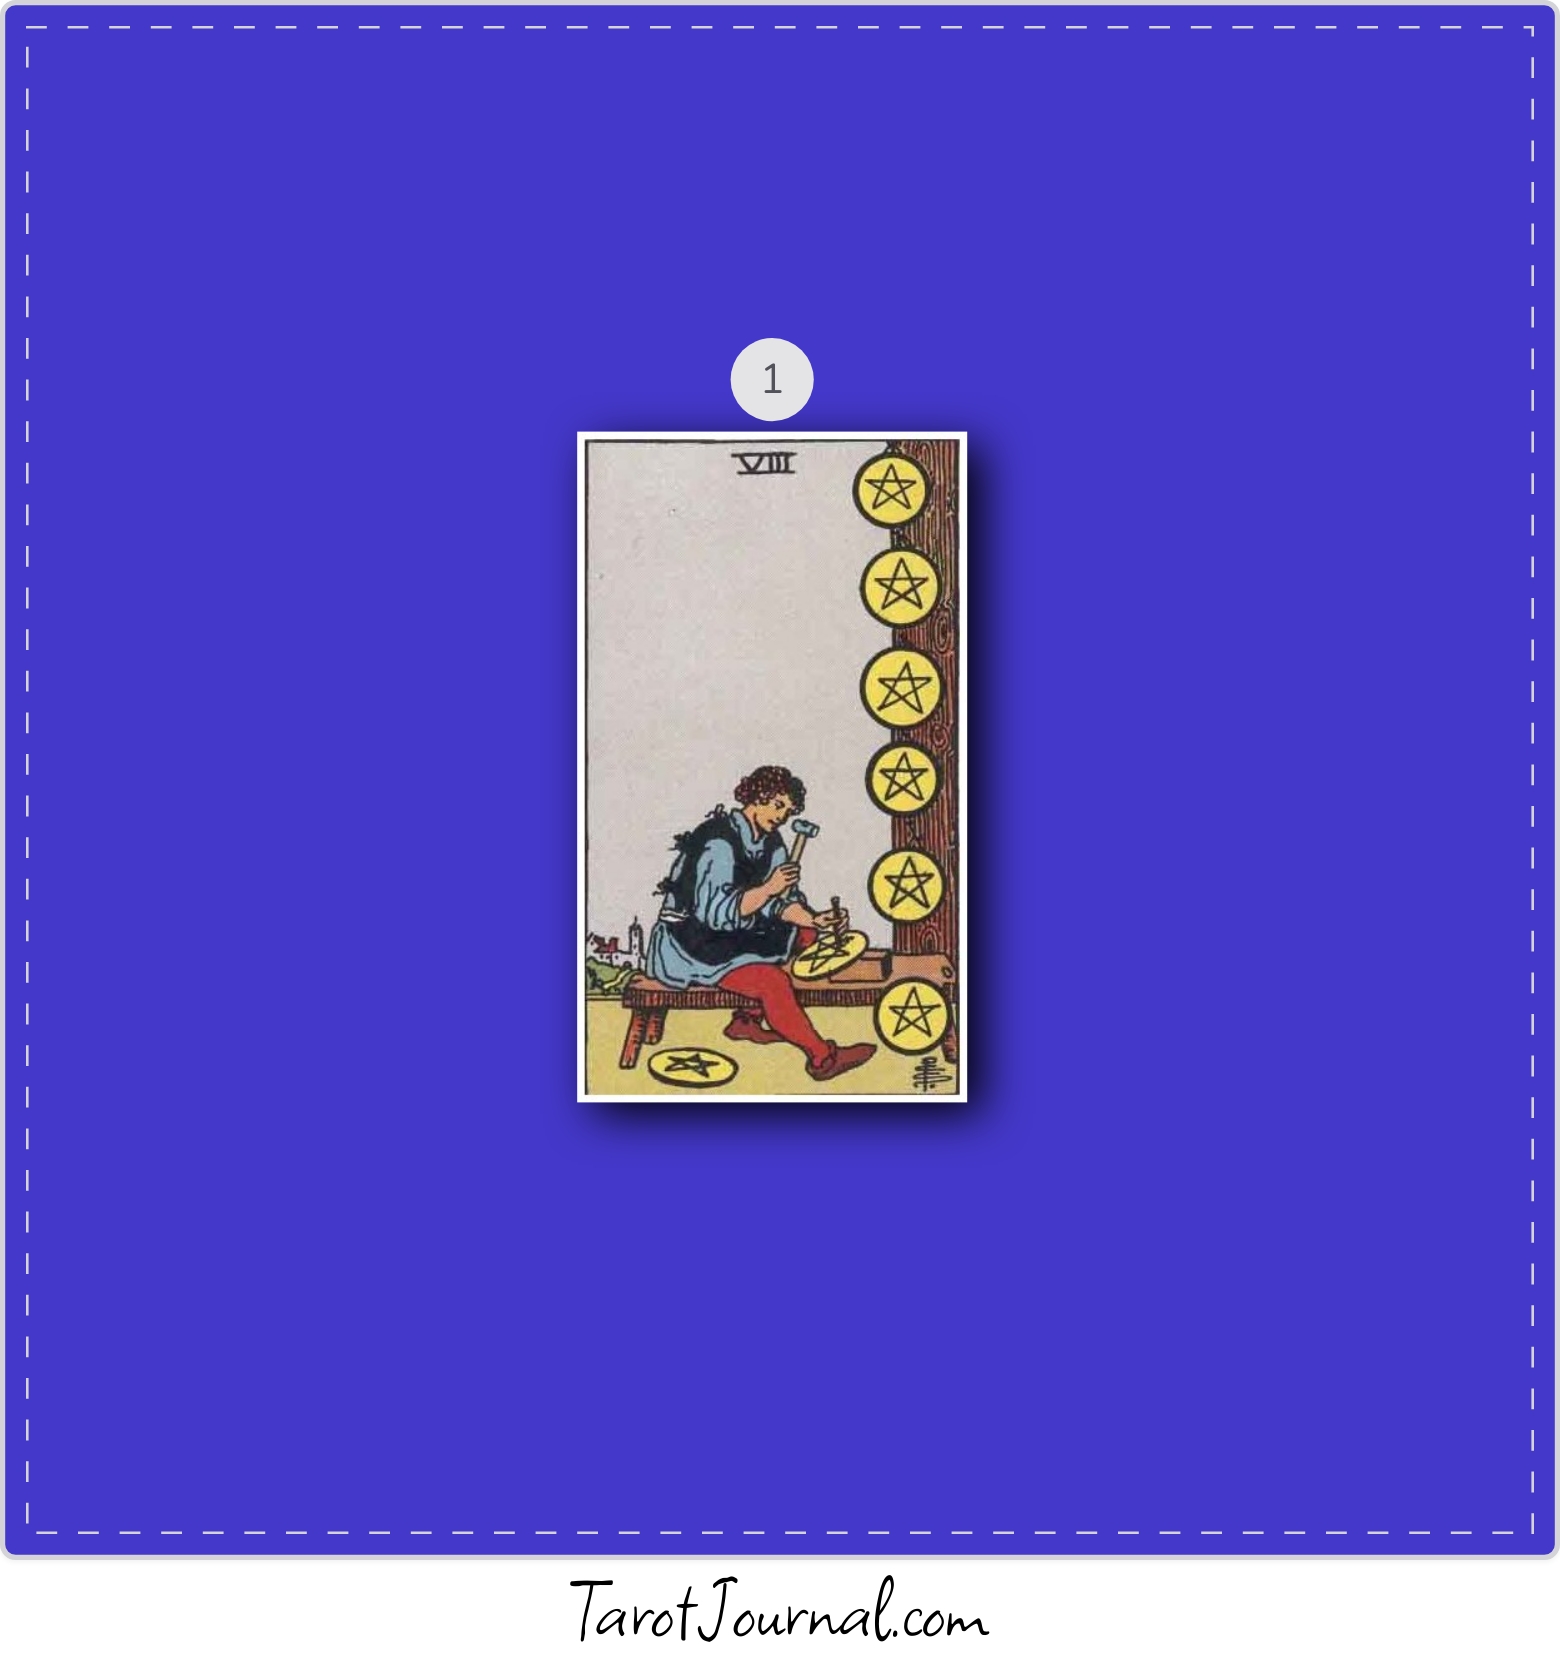 Daily - tarot reading by Ici La Lune